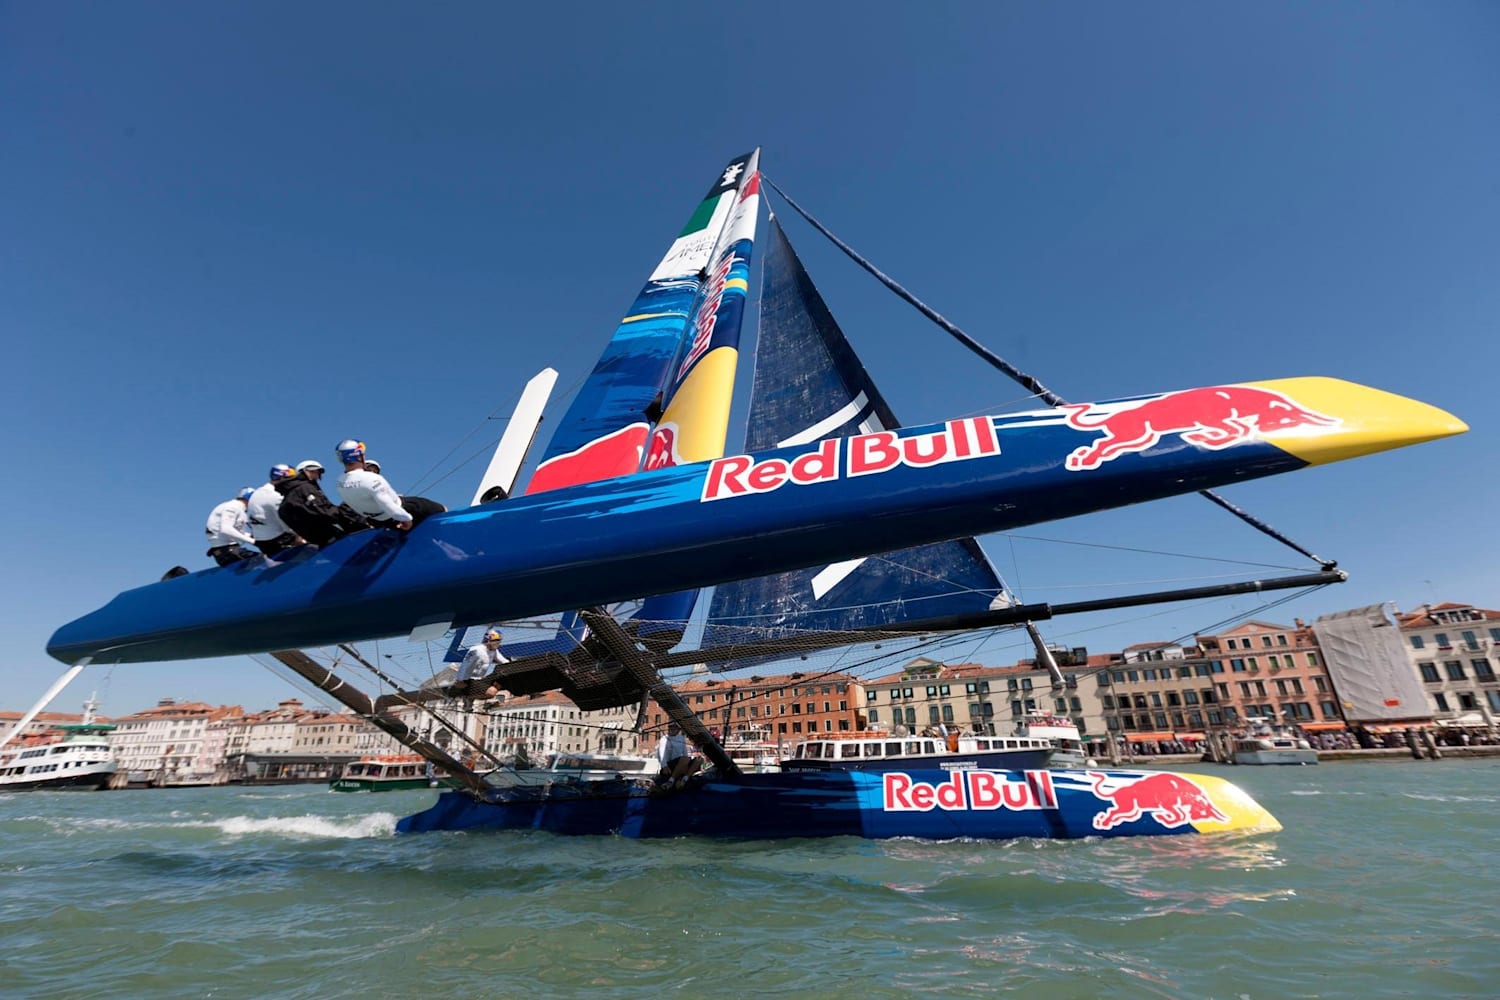 Red Bull launches into the Americas Cup